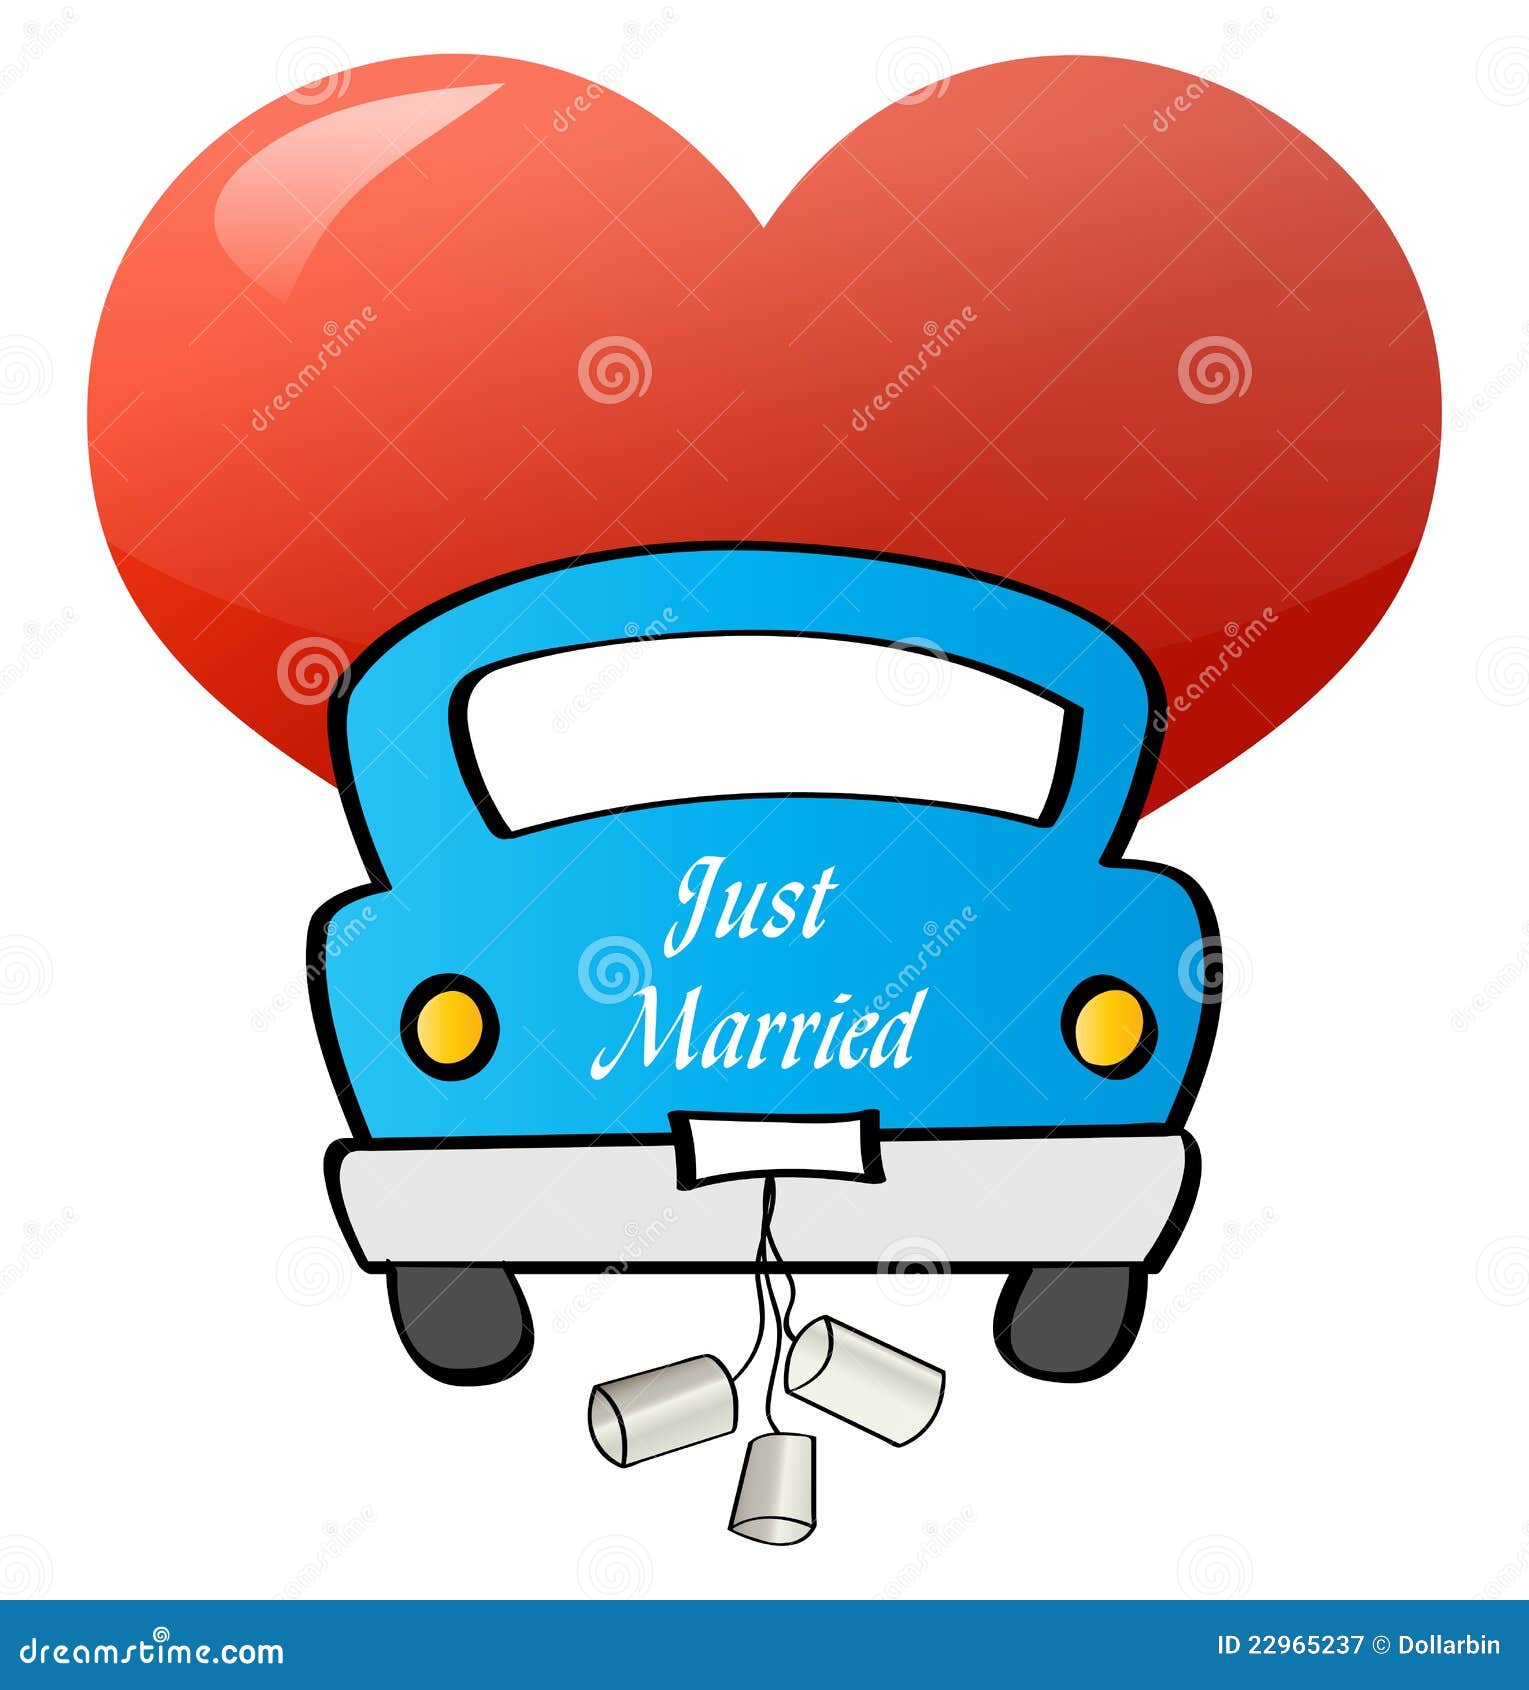 Just Married - Car Royalty Free Stock Photography - Image: 22965237